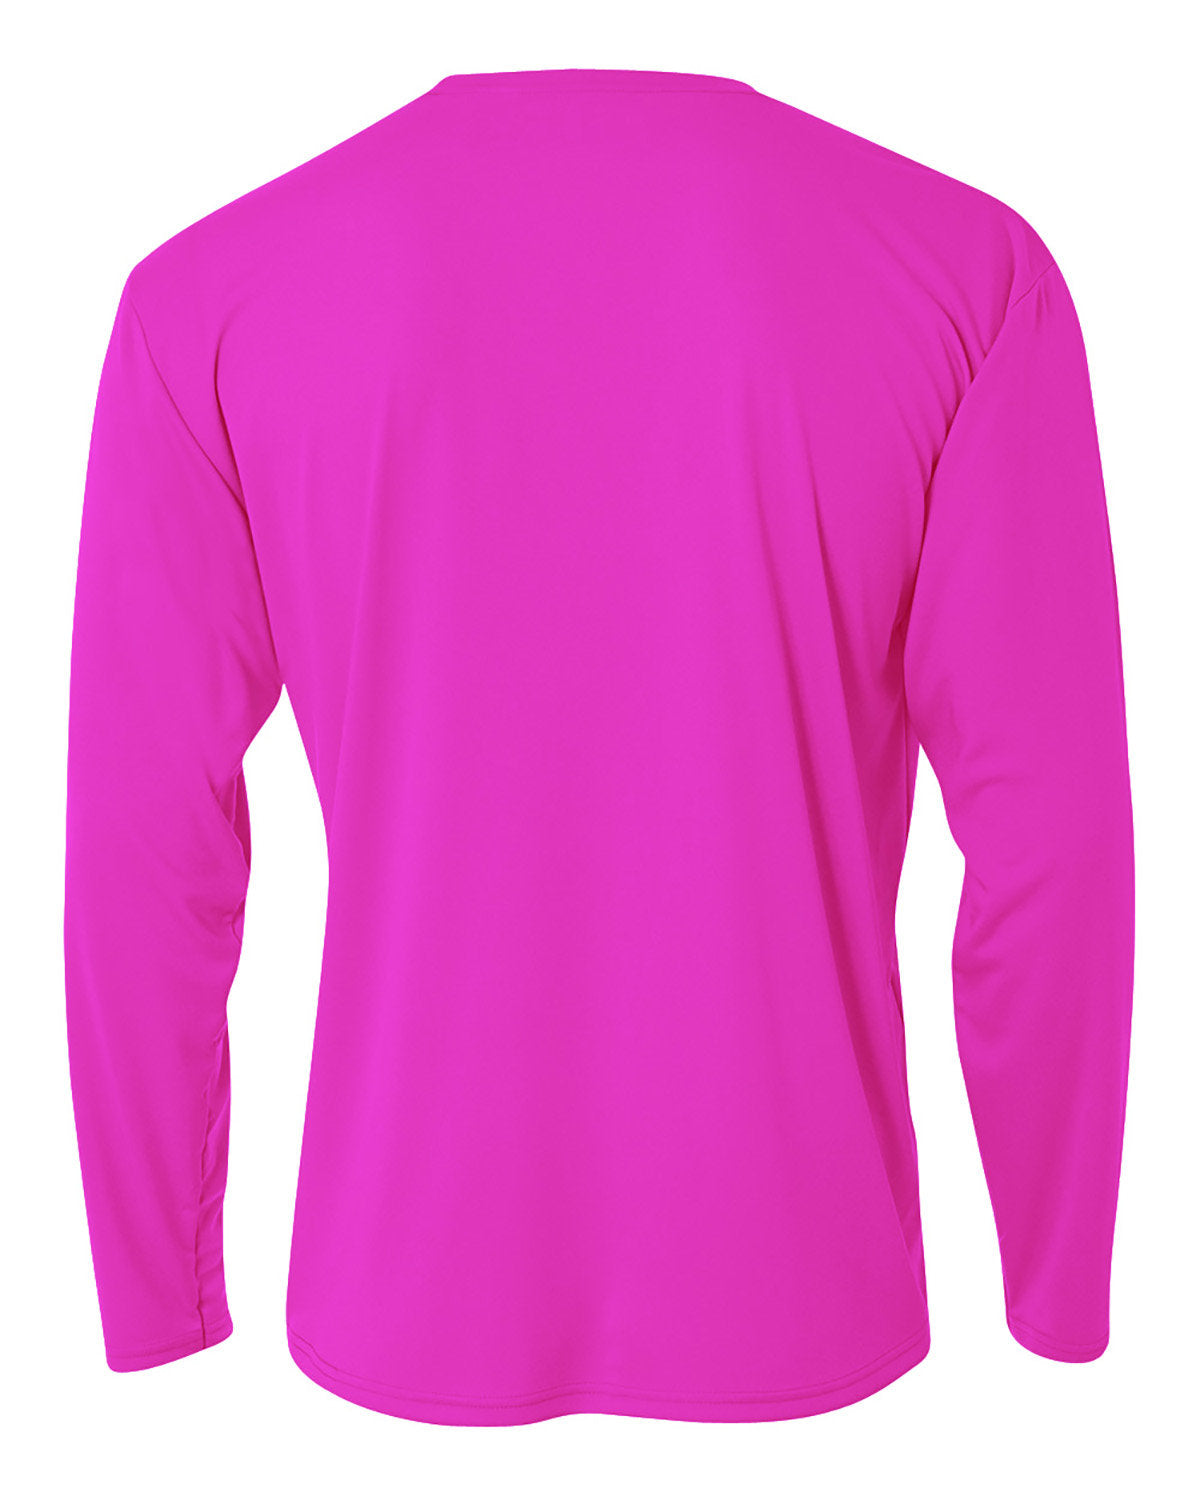 The Athlete's Long Sleeve